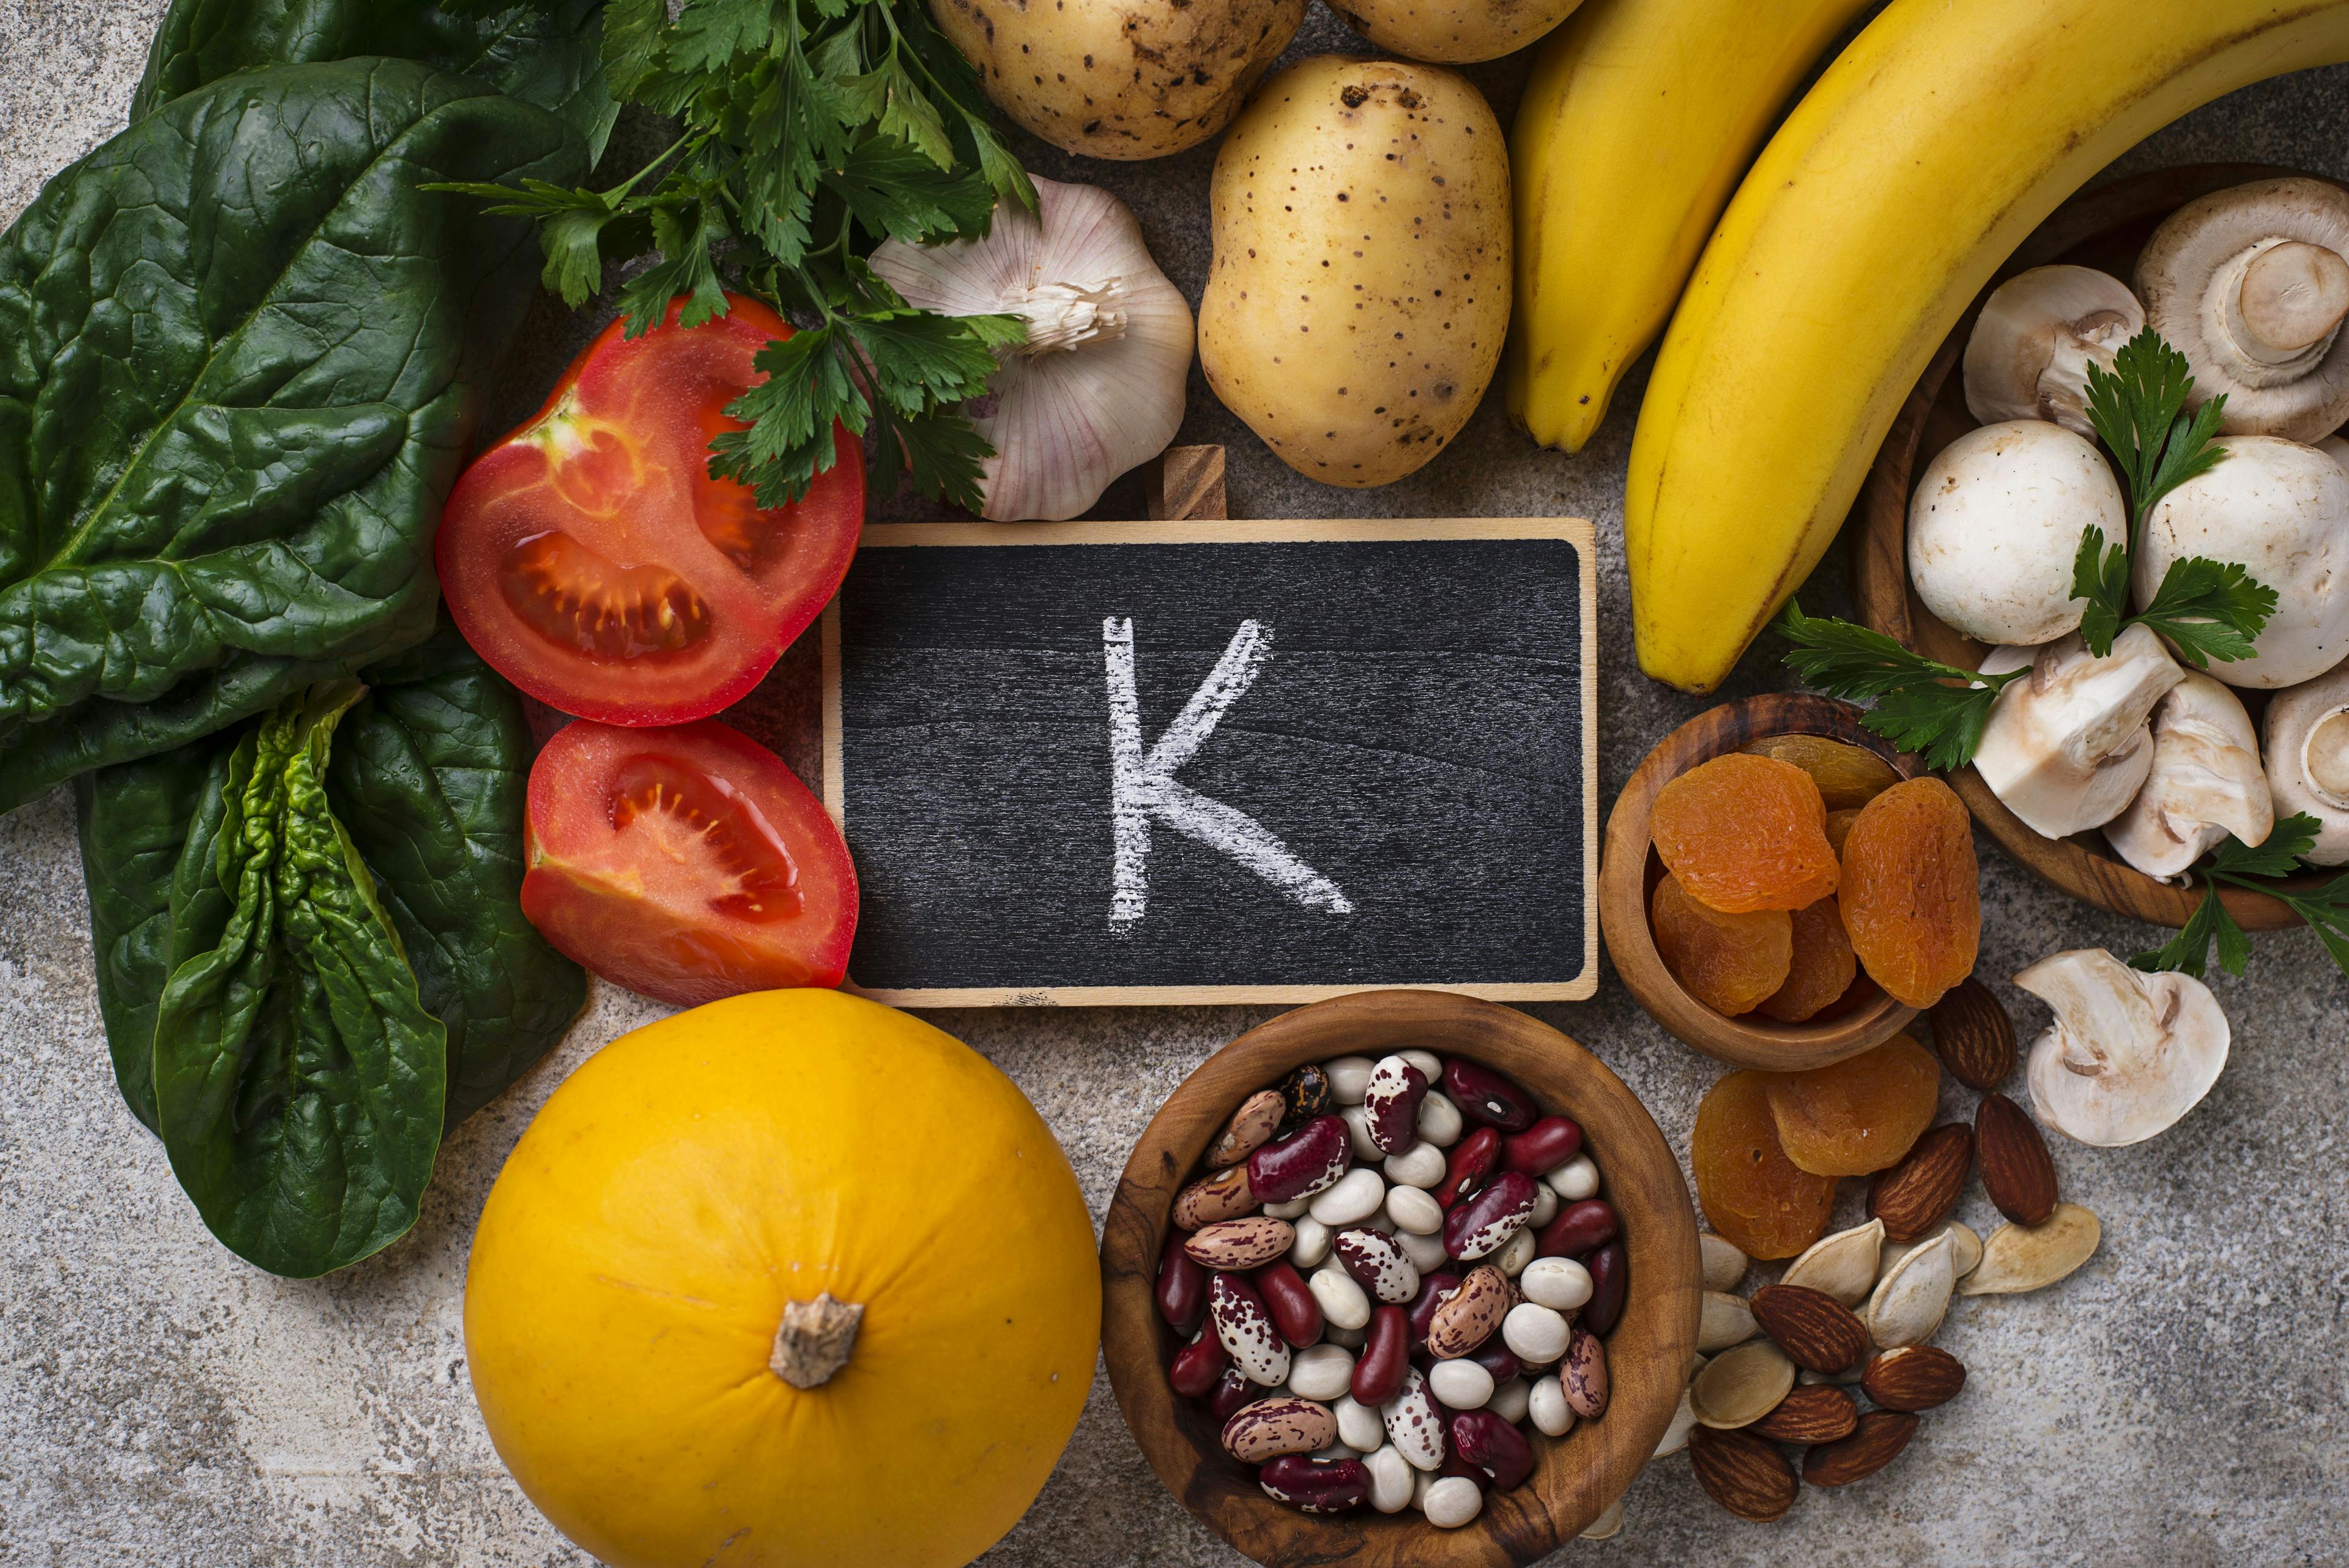 Vitamin K’s impact on bone mineral density and osteoporosis shows mixed results